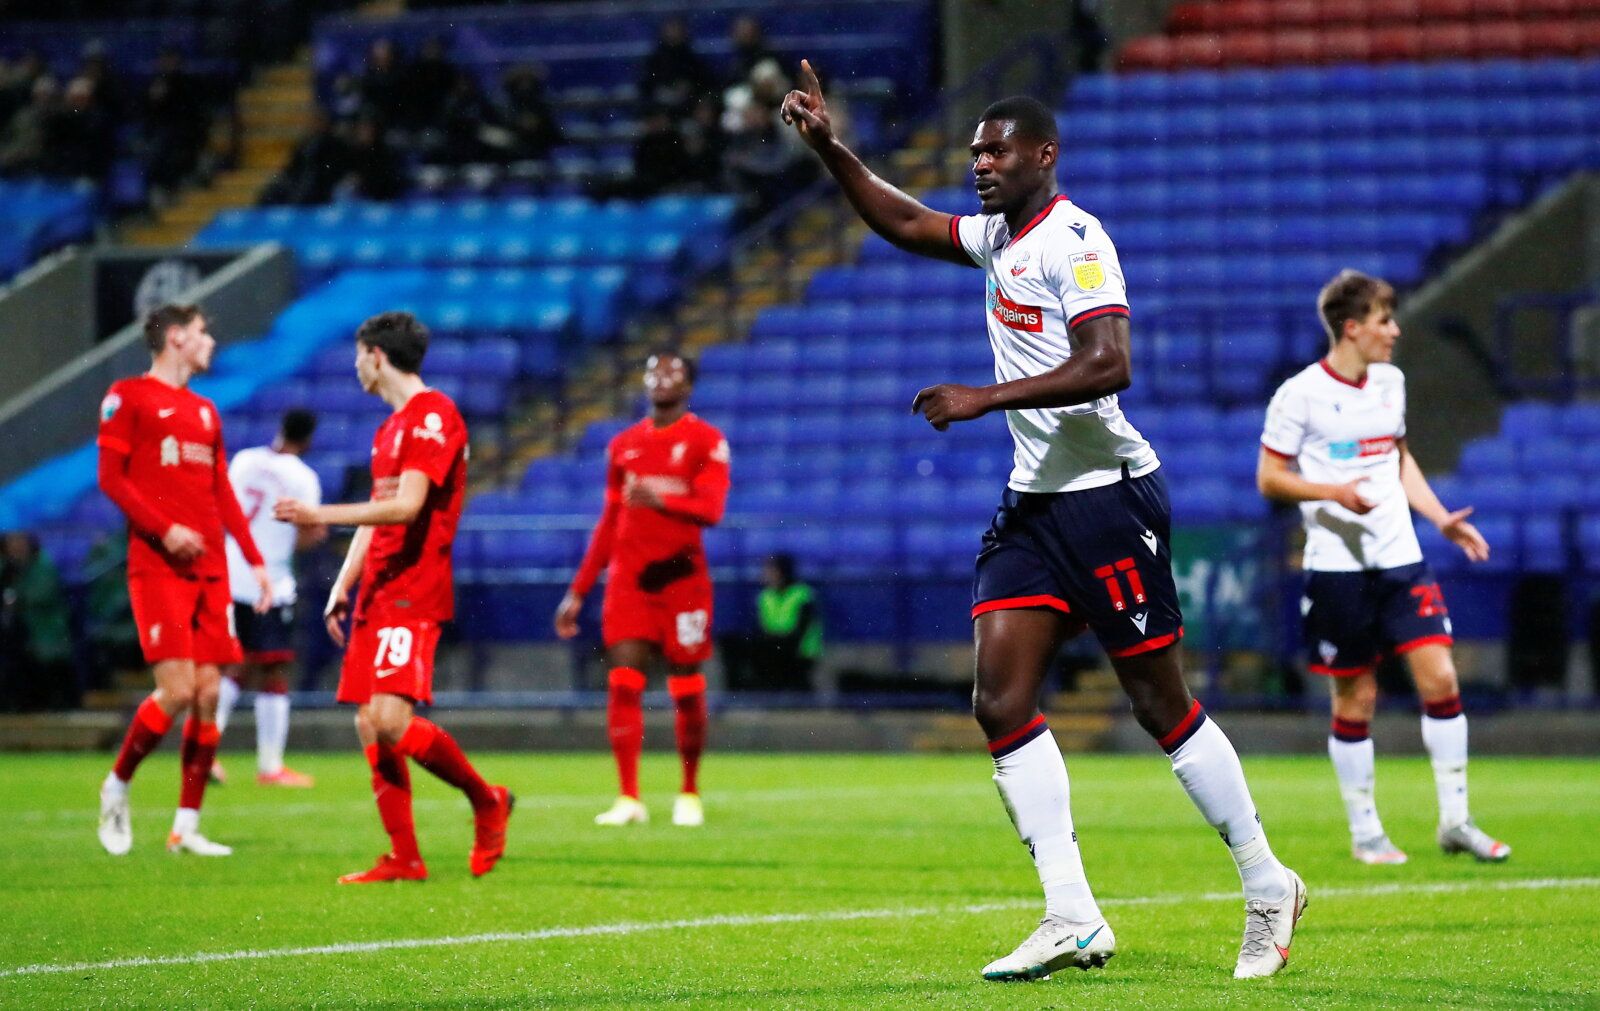 Soccer Football - EFL Trophy - Group Stage - Bolton Wanderers v Liverpool U21 - University of Bolton Stadium, Bolton, Britain - October 5, 2021  Bolton Wanderers' Amadou Bakayoko celebrates scoring their second goal   Action Images/Jason Cairnduff  EDITORIAL USE ONLY. No use with unauthorized audio, video, data, fixture lists, club/league logos or "live" services. Online in-match use limited to 75 images, no video emulation. No use in betting, games or single club/league/player publications.  Pl